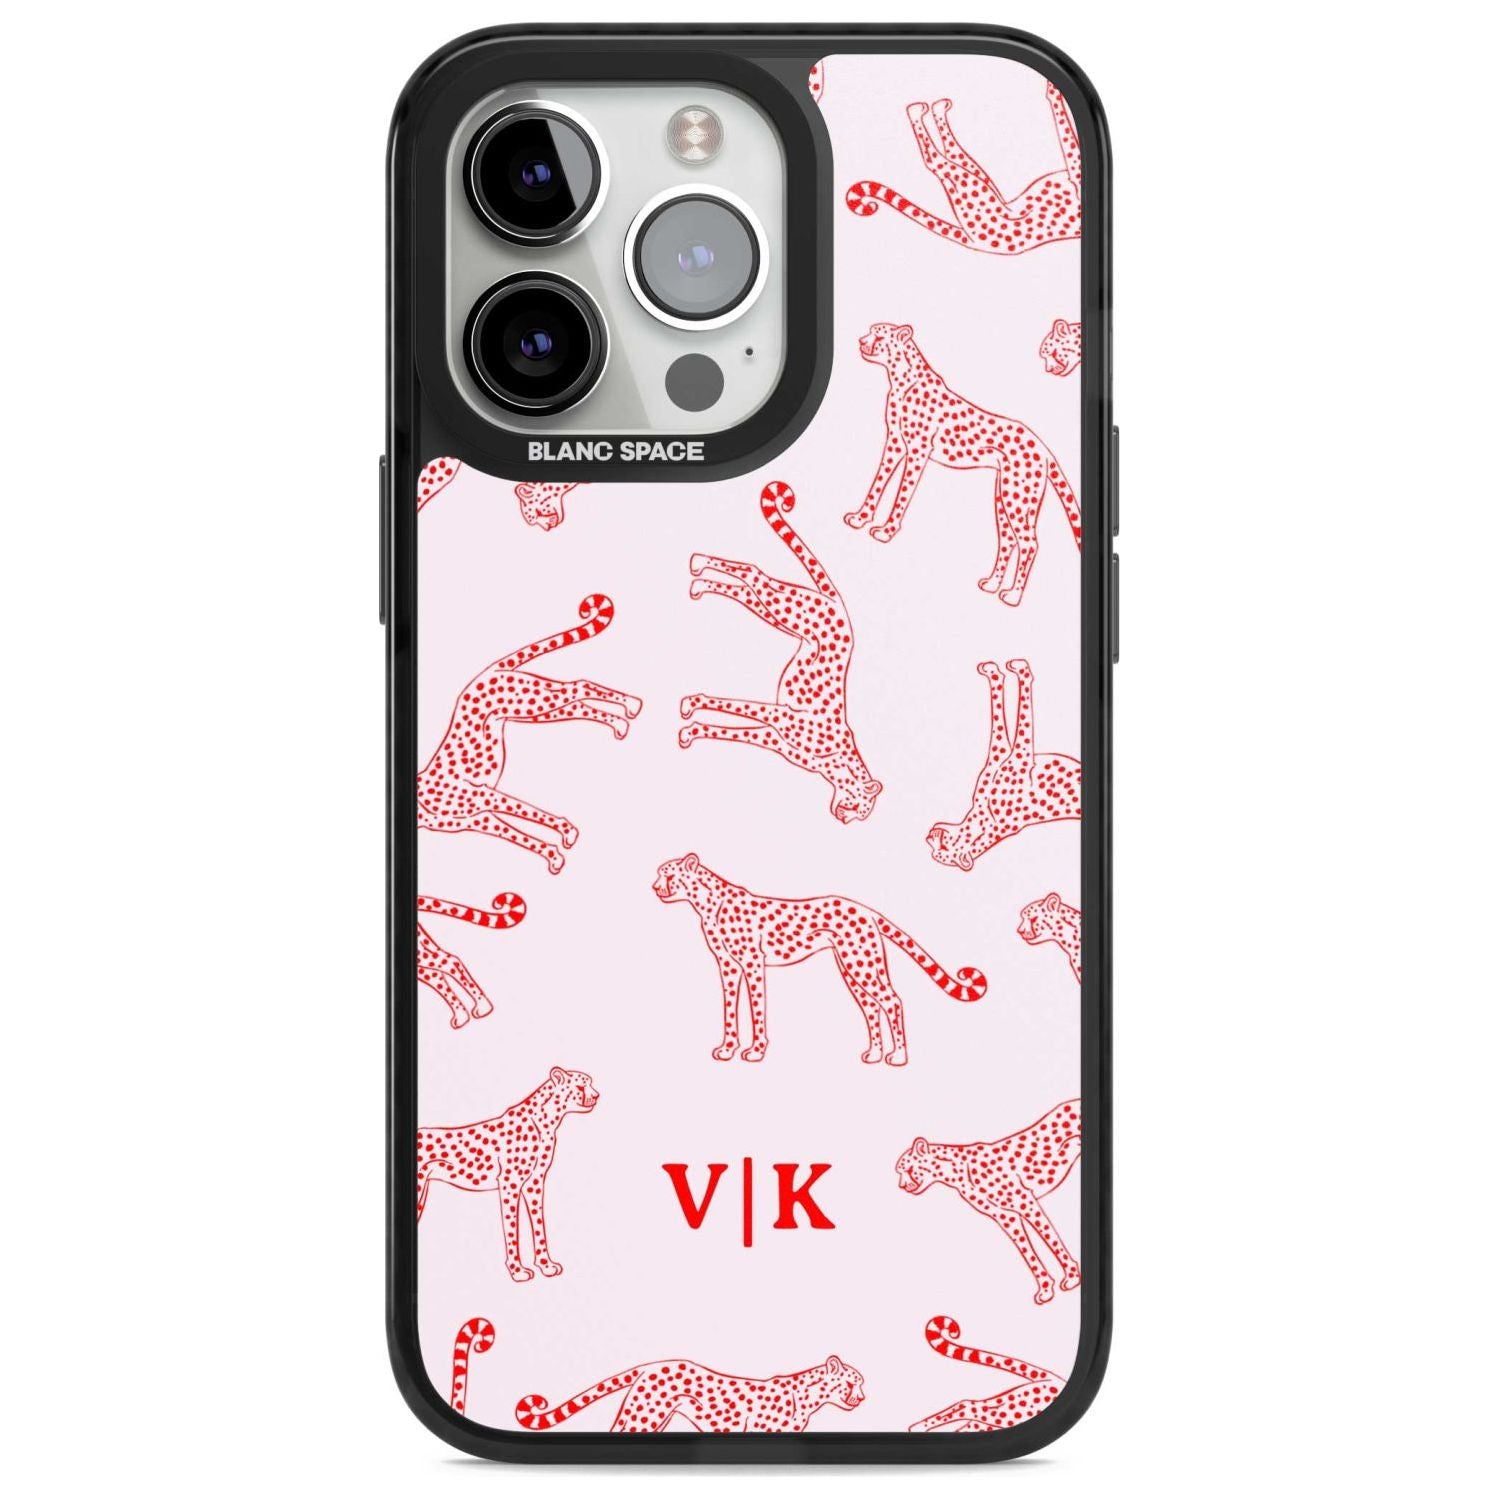 Personalised + Red & Pink Cheetah Custom Phone Case iPhone 15 Pro Max / Magsafe Black Impact Case,iPhone 15 Pro / Magsafe Black Impact Case,iPhone 14 Pro Max / Magsafe Black Impact Case,iPhone 14 Pro / Magsafe Black Impact Case,iPhone 13 Pro / Magsafe Black Impact Case Blanc Space